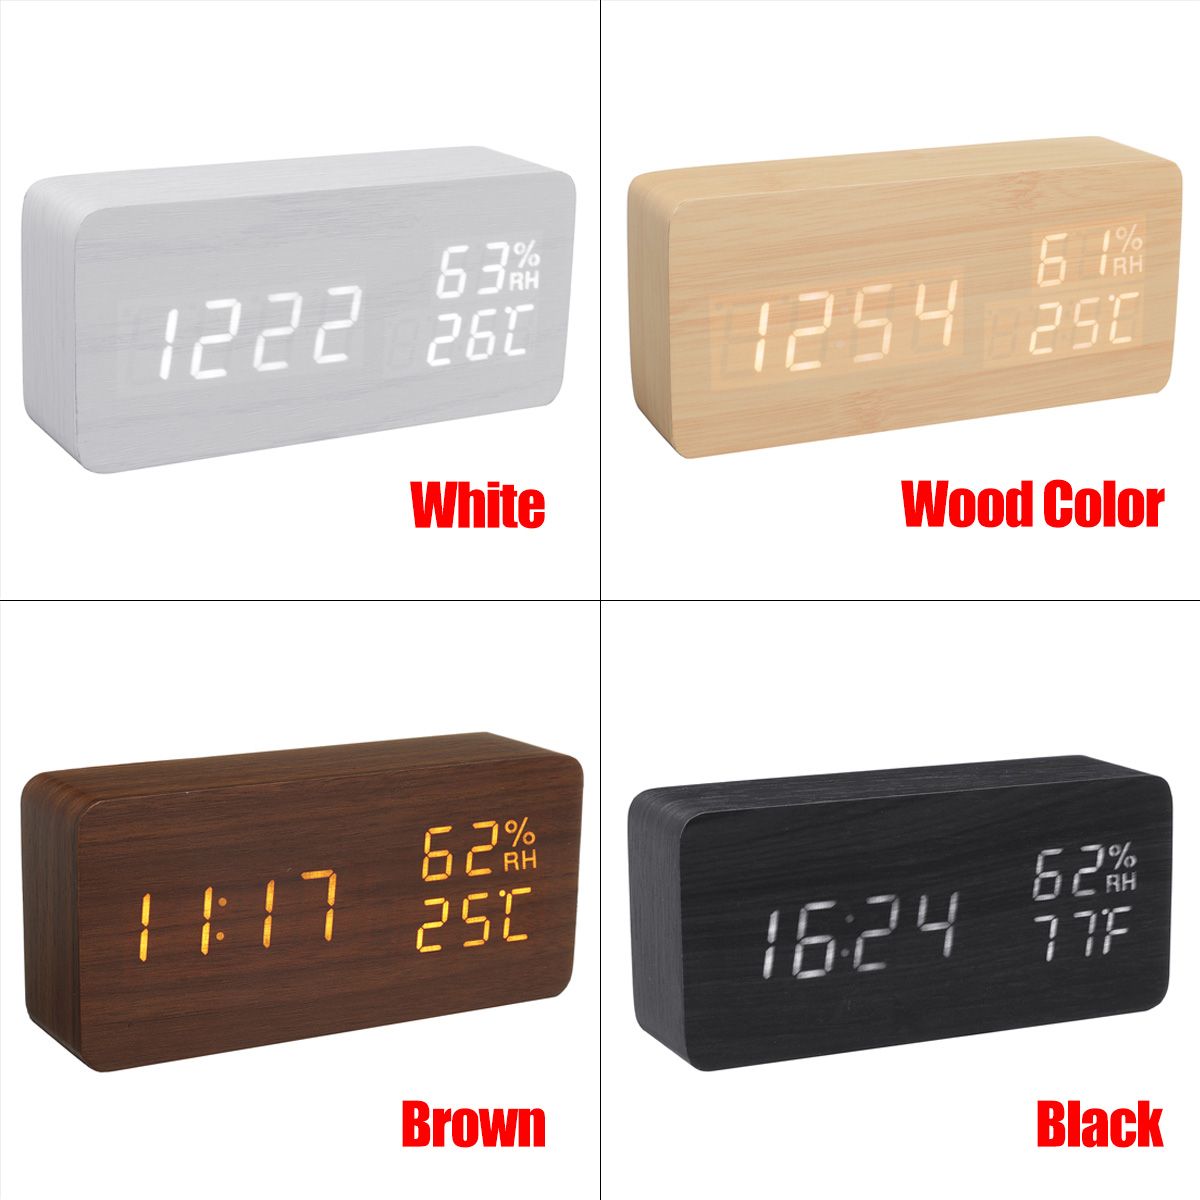 Modern-Wooden-Wood-Digital-Thermometer-USB-Charger-LED-Desk-Alarm-Wireless-Clock-1739446